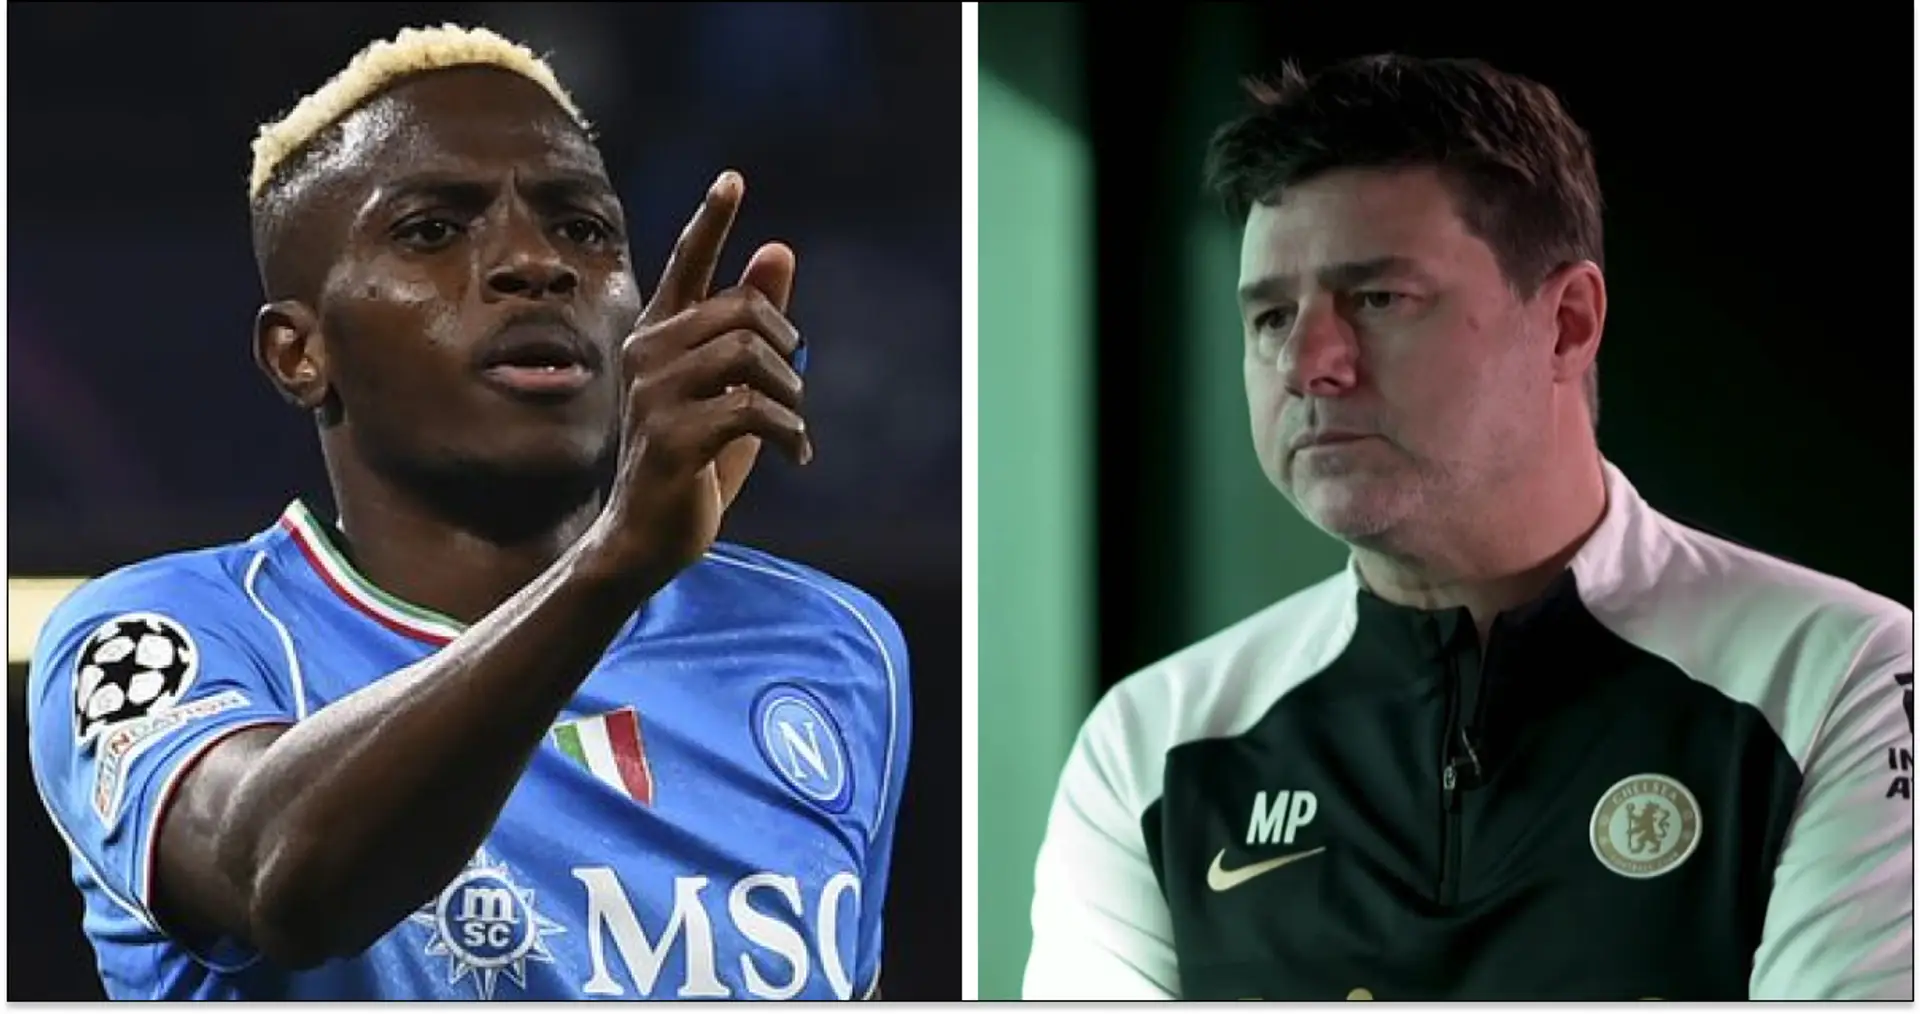 'Not under this manager': Chelsea fan does not want Osimhen at club after striker scores v Barca